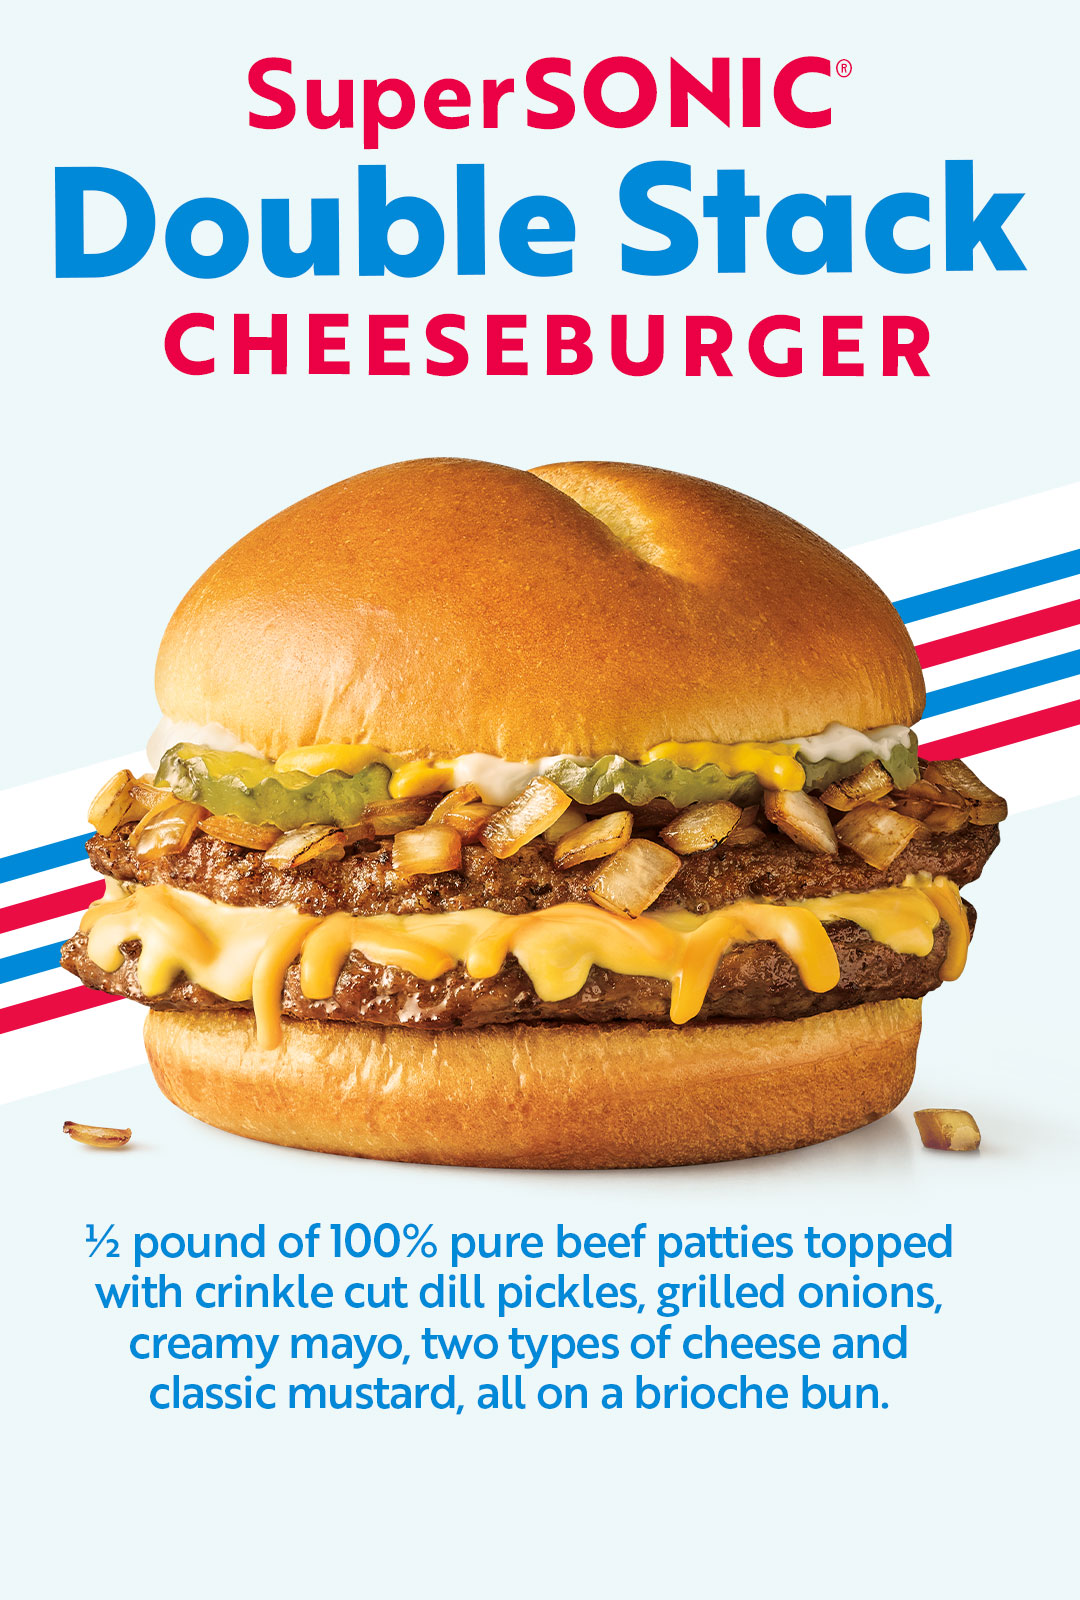 promo : The SuperSonic Double Stack Cheeseburger